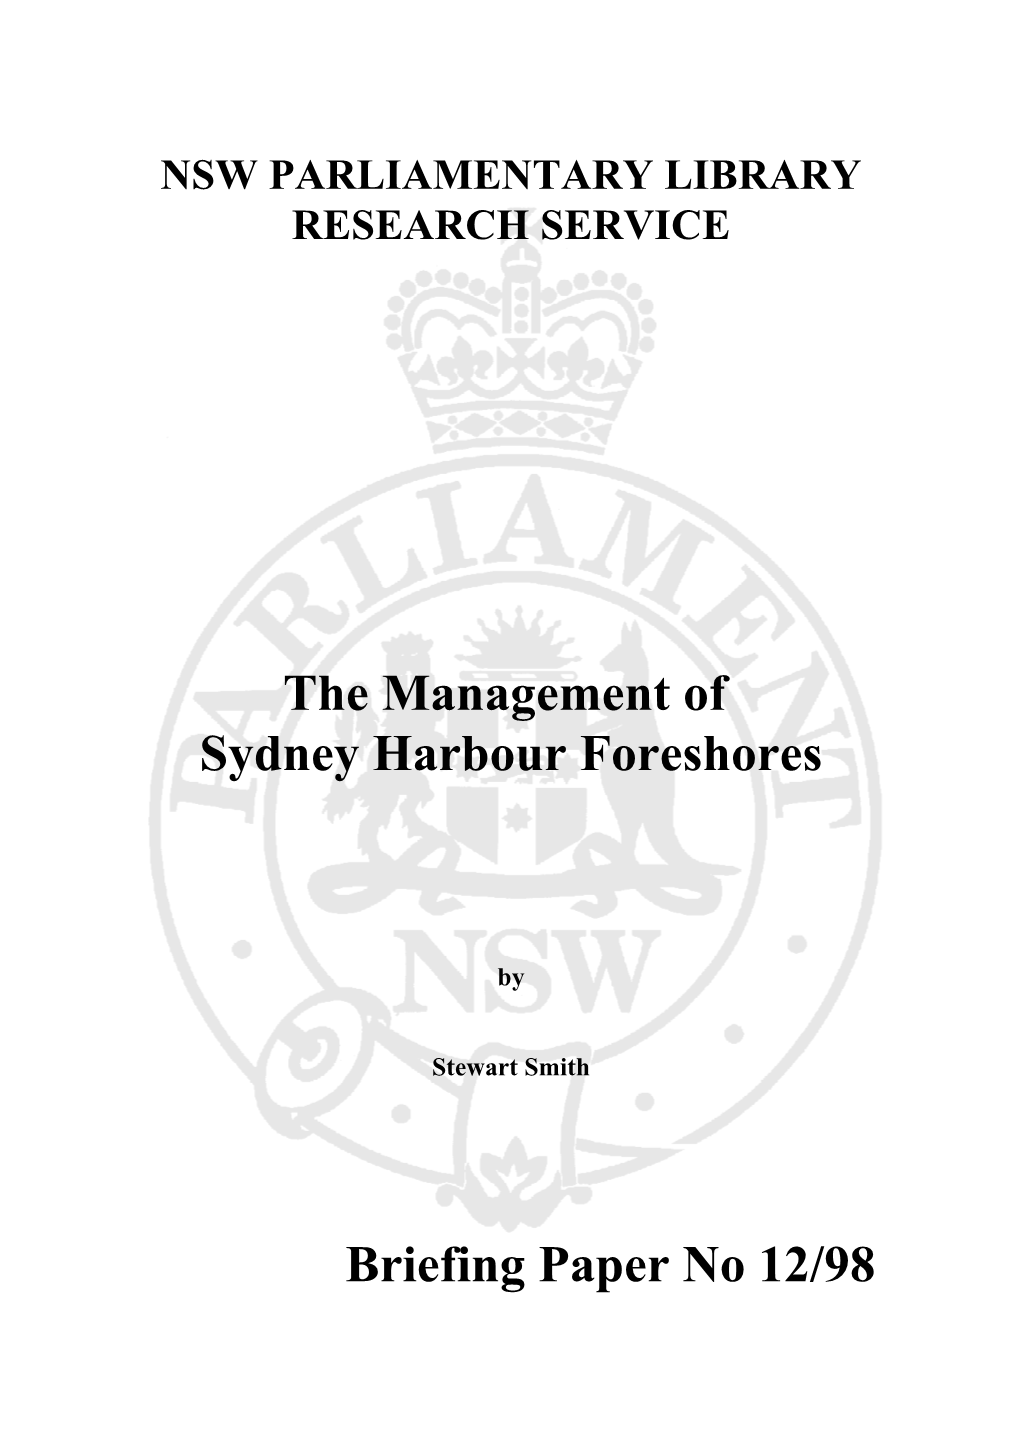 The Management of Sydney Harbour Foreshores Briefing Paper No 12/98